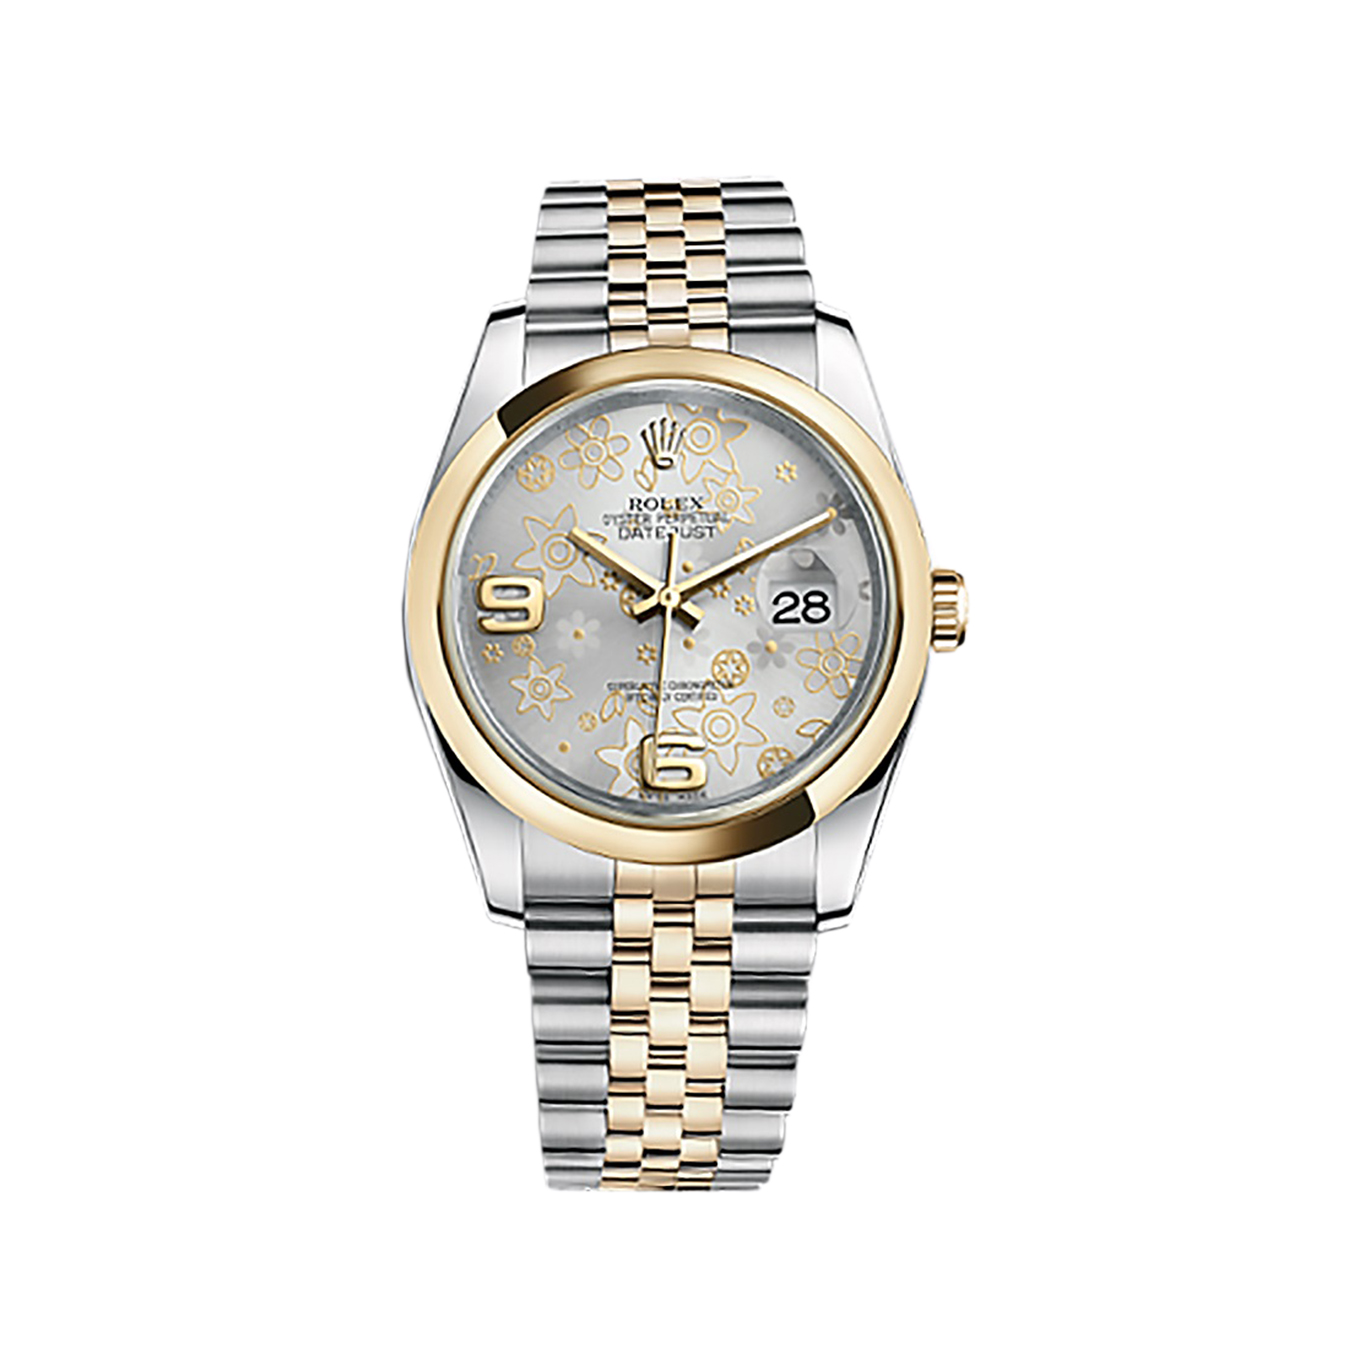 Datejust 36 116203 Gold & Stainless Steel Watch (Silver Floral Motif) - Click Image to Close